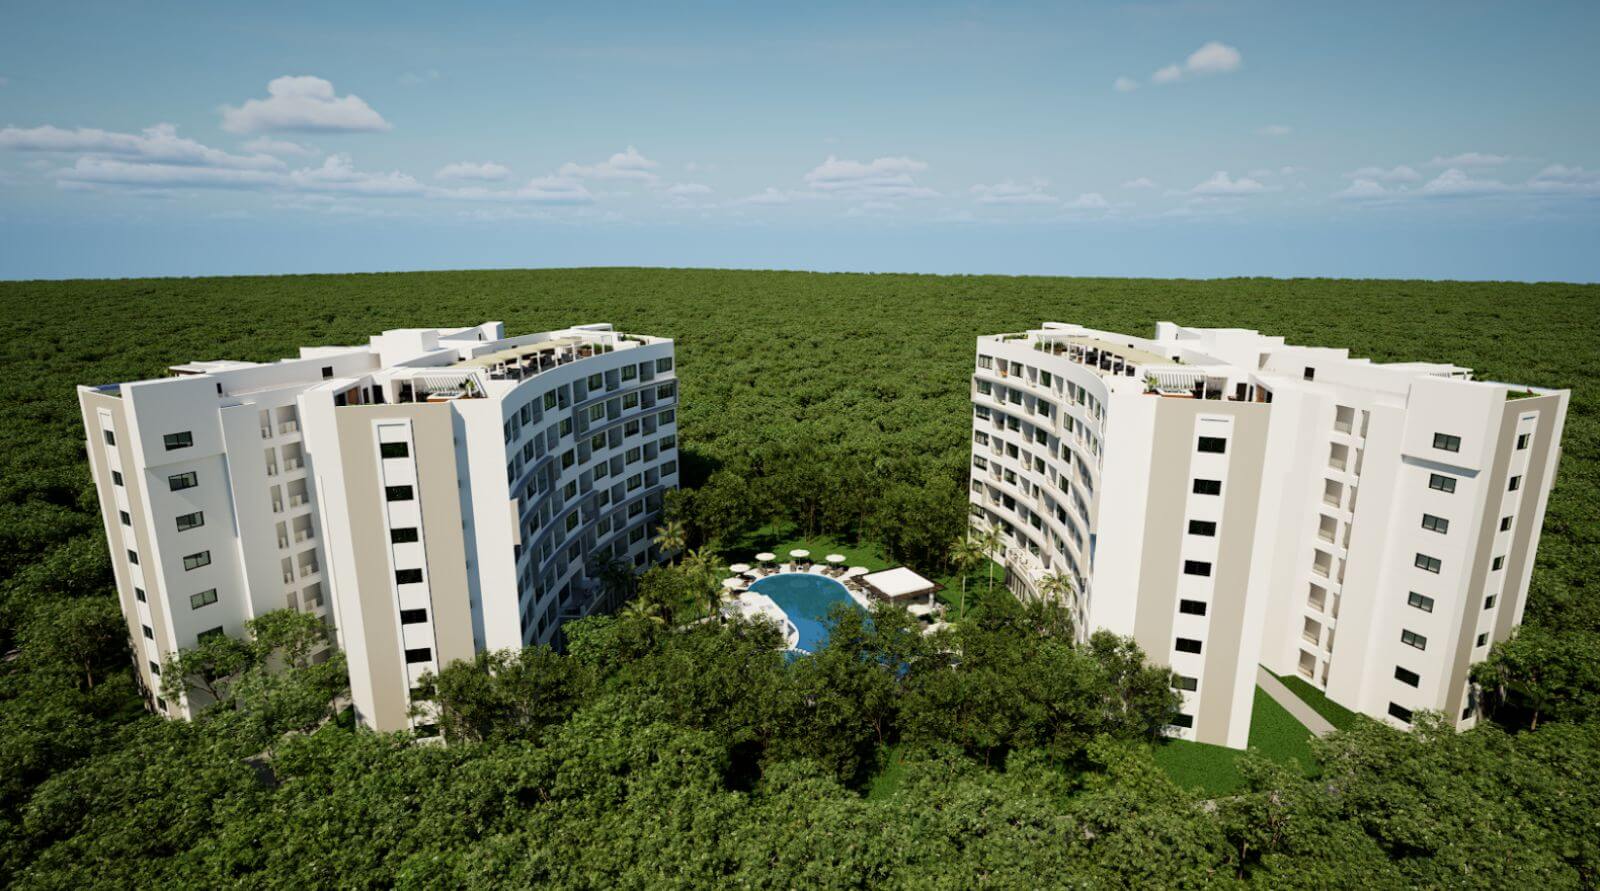 Apartment with private garden lock off system, ocean view from rooftop, 190 meters from the beach, pool view.